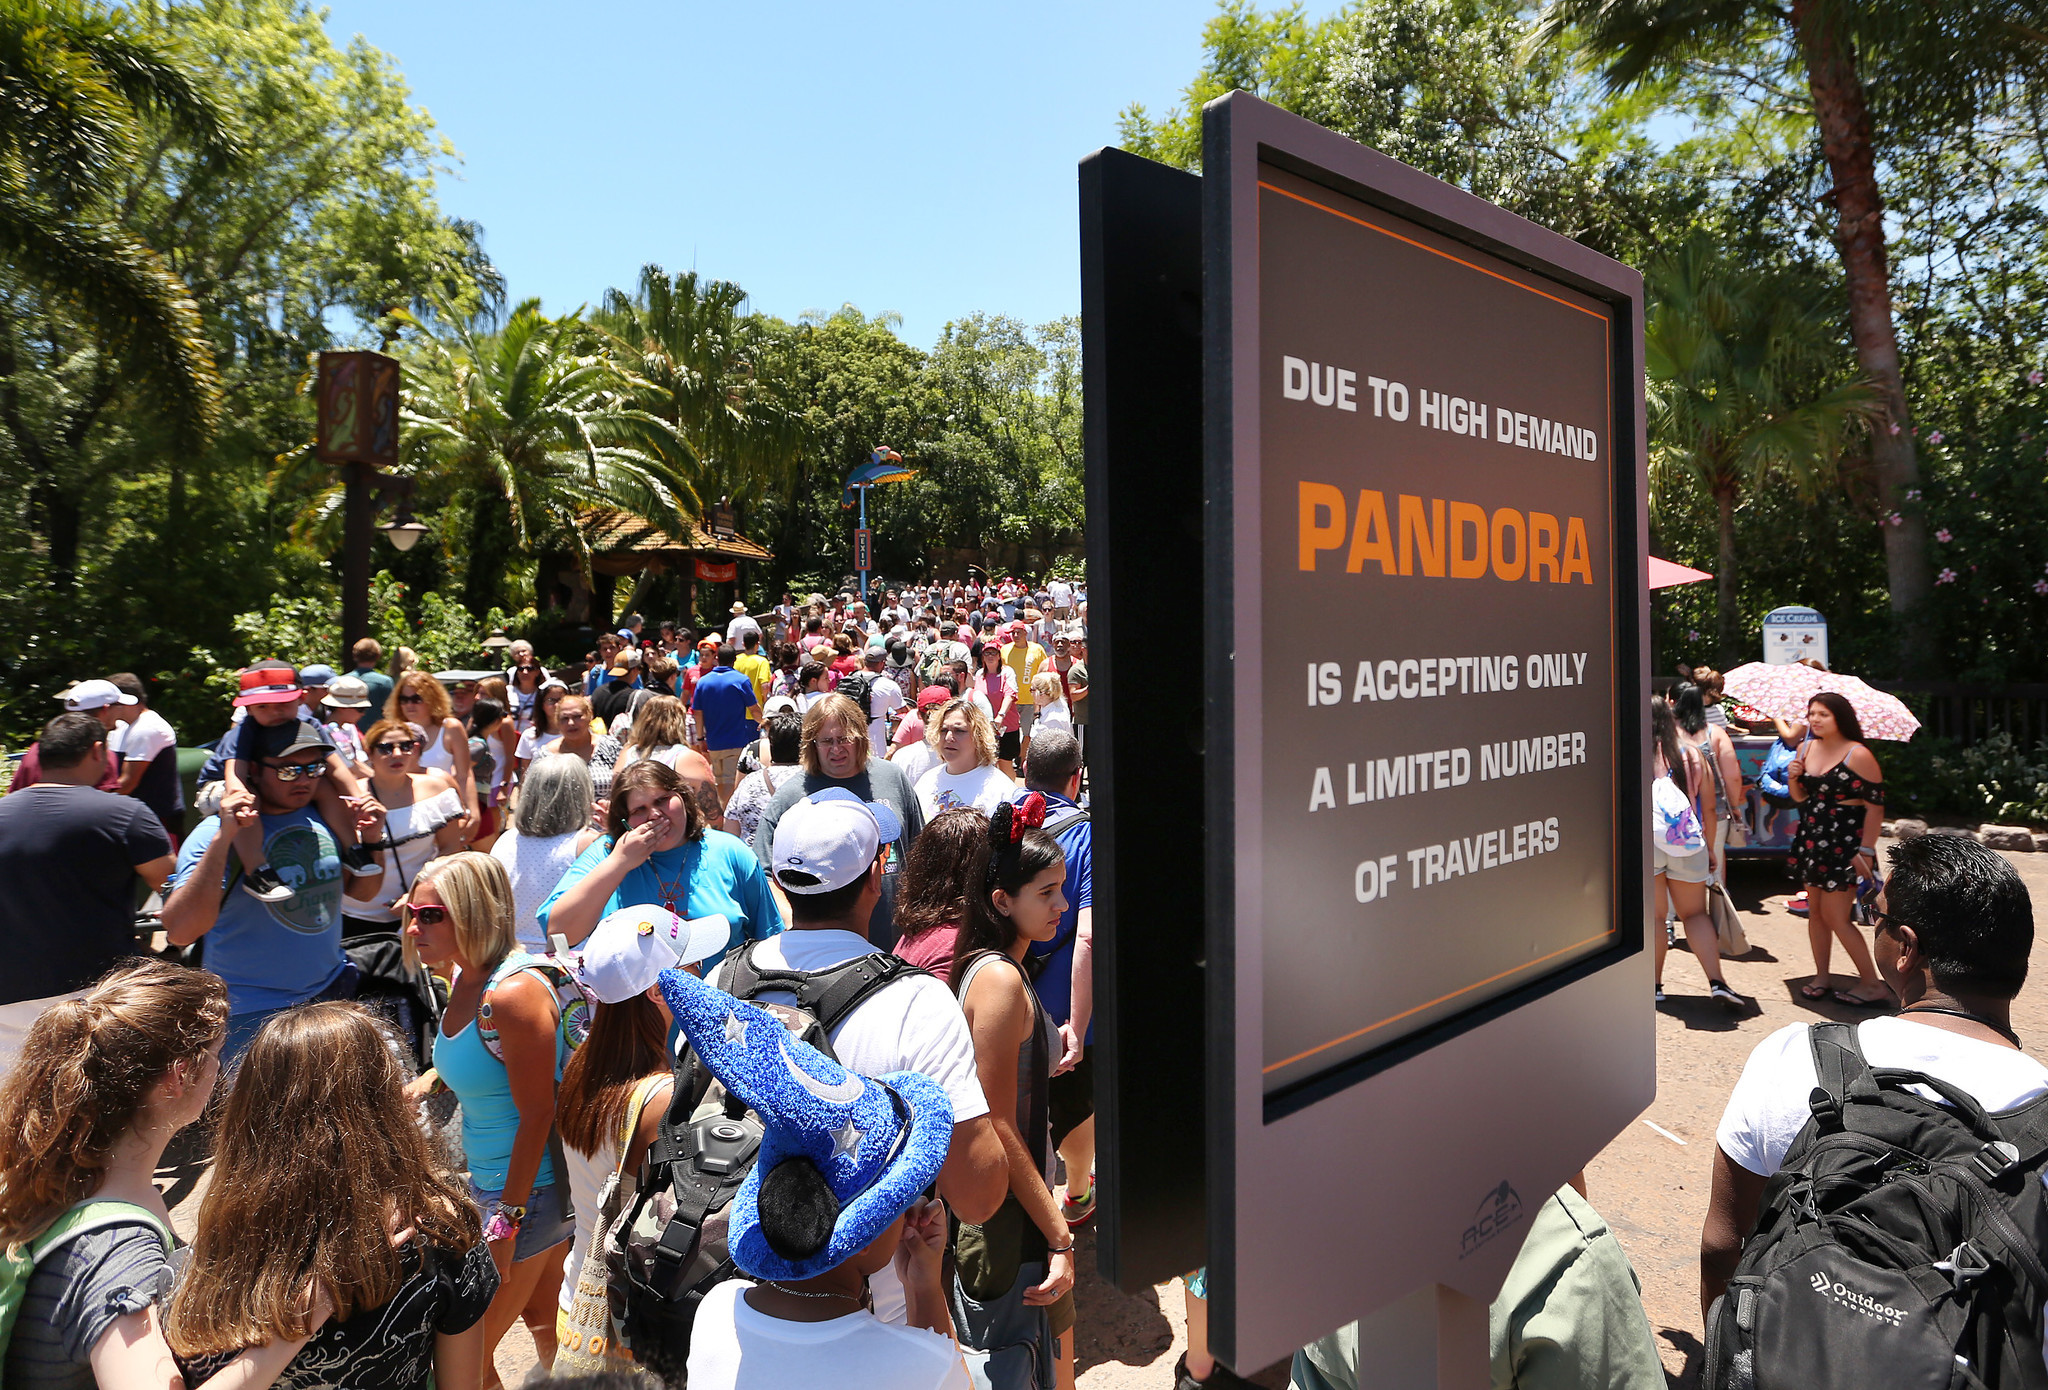 os-pictures-opening-day-at-pandora-the-world-o-018